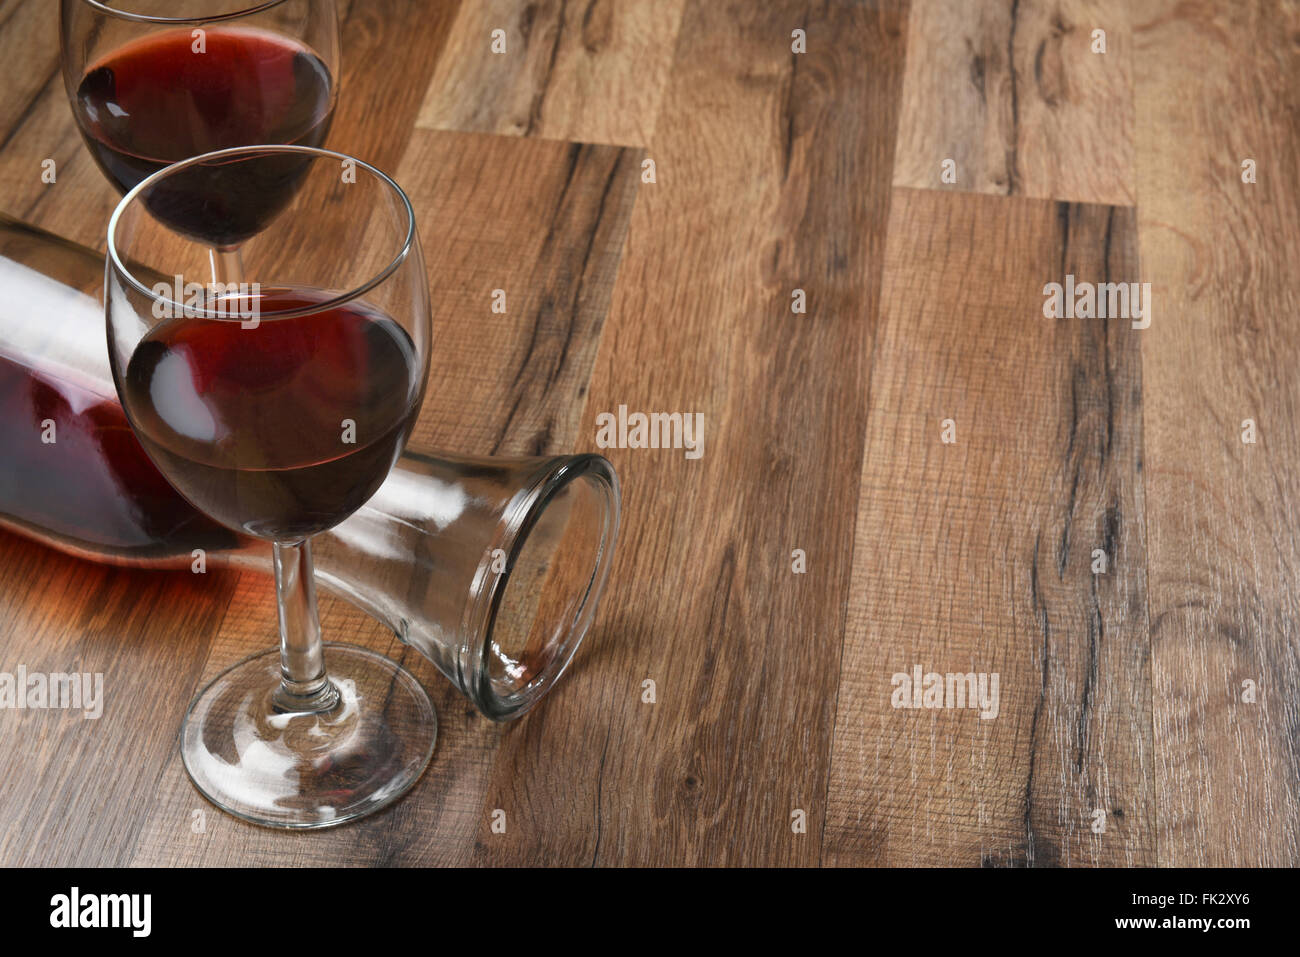 Top view of a carafe and two wine glasses on a wood table with copy space. Stock Photo